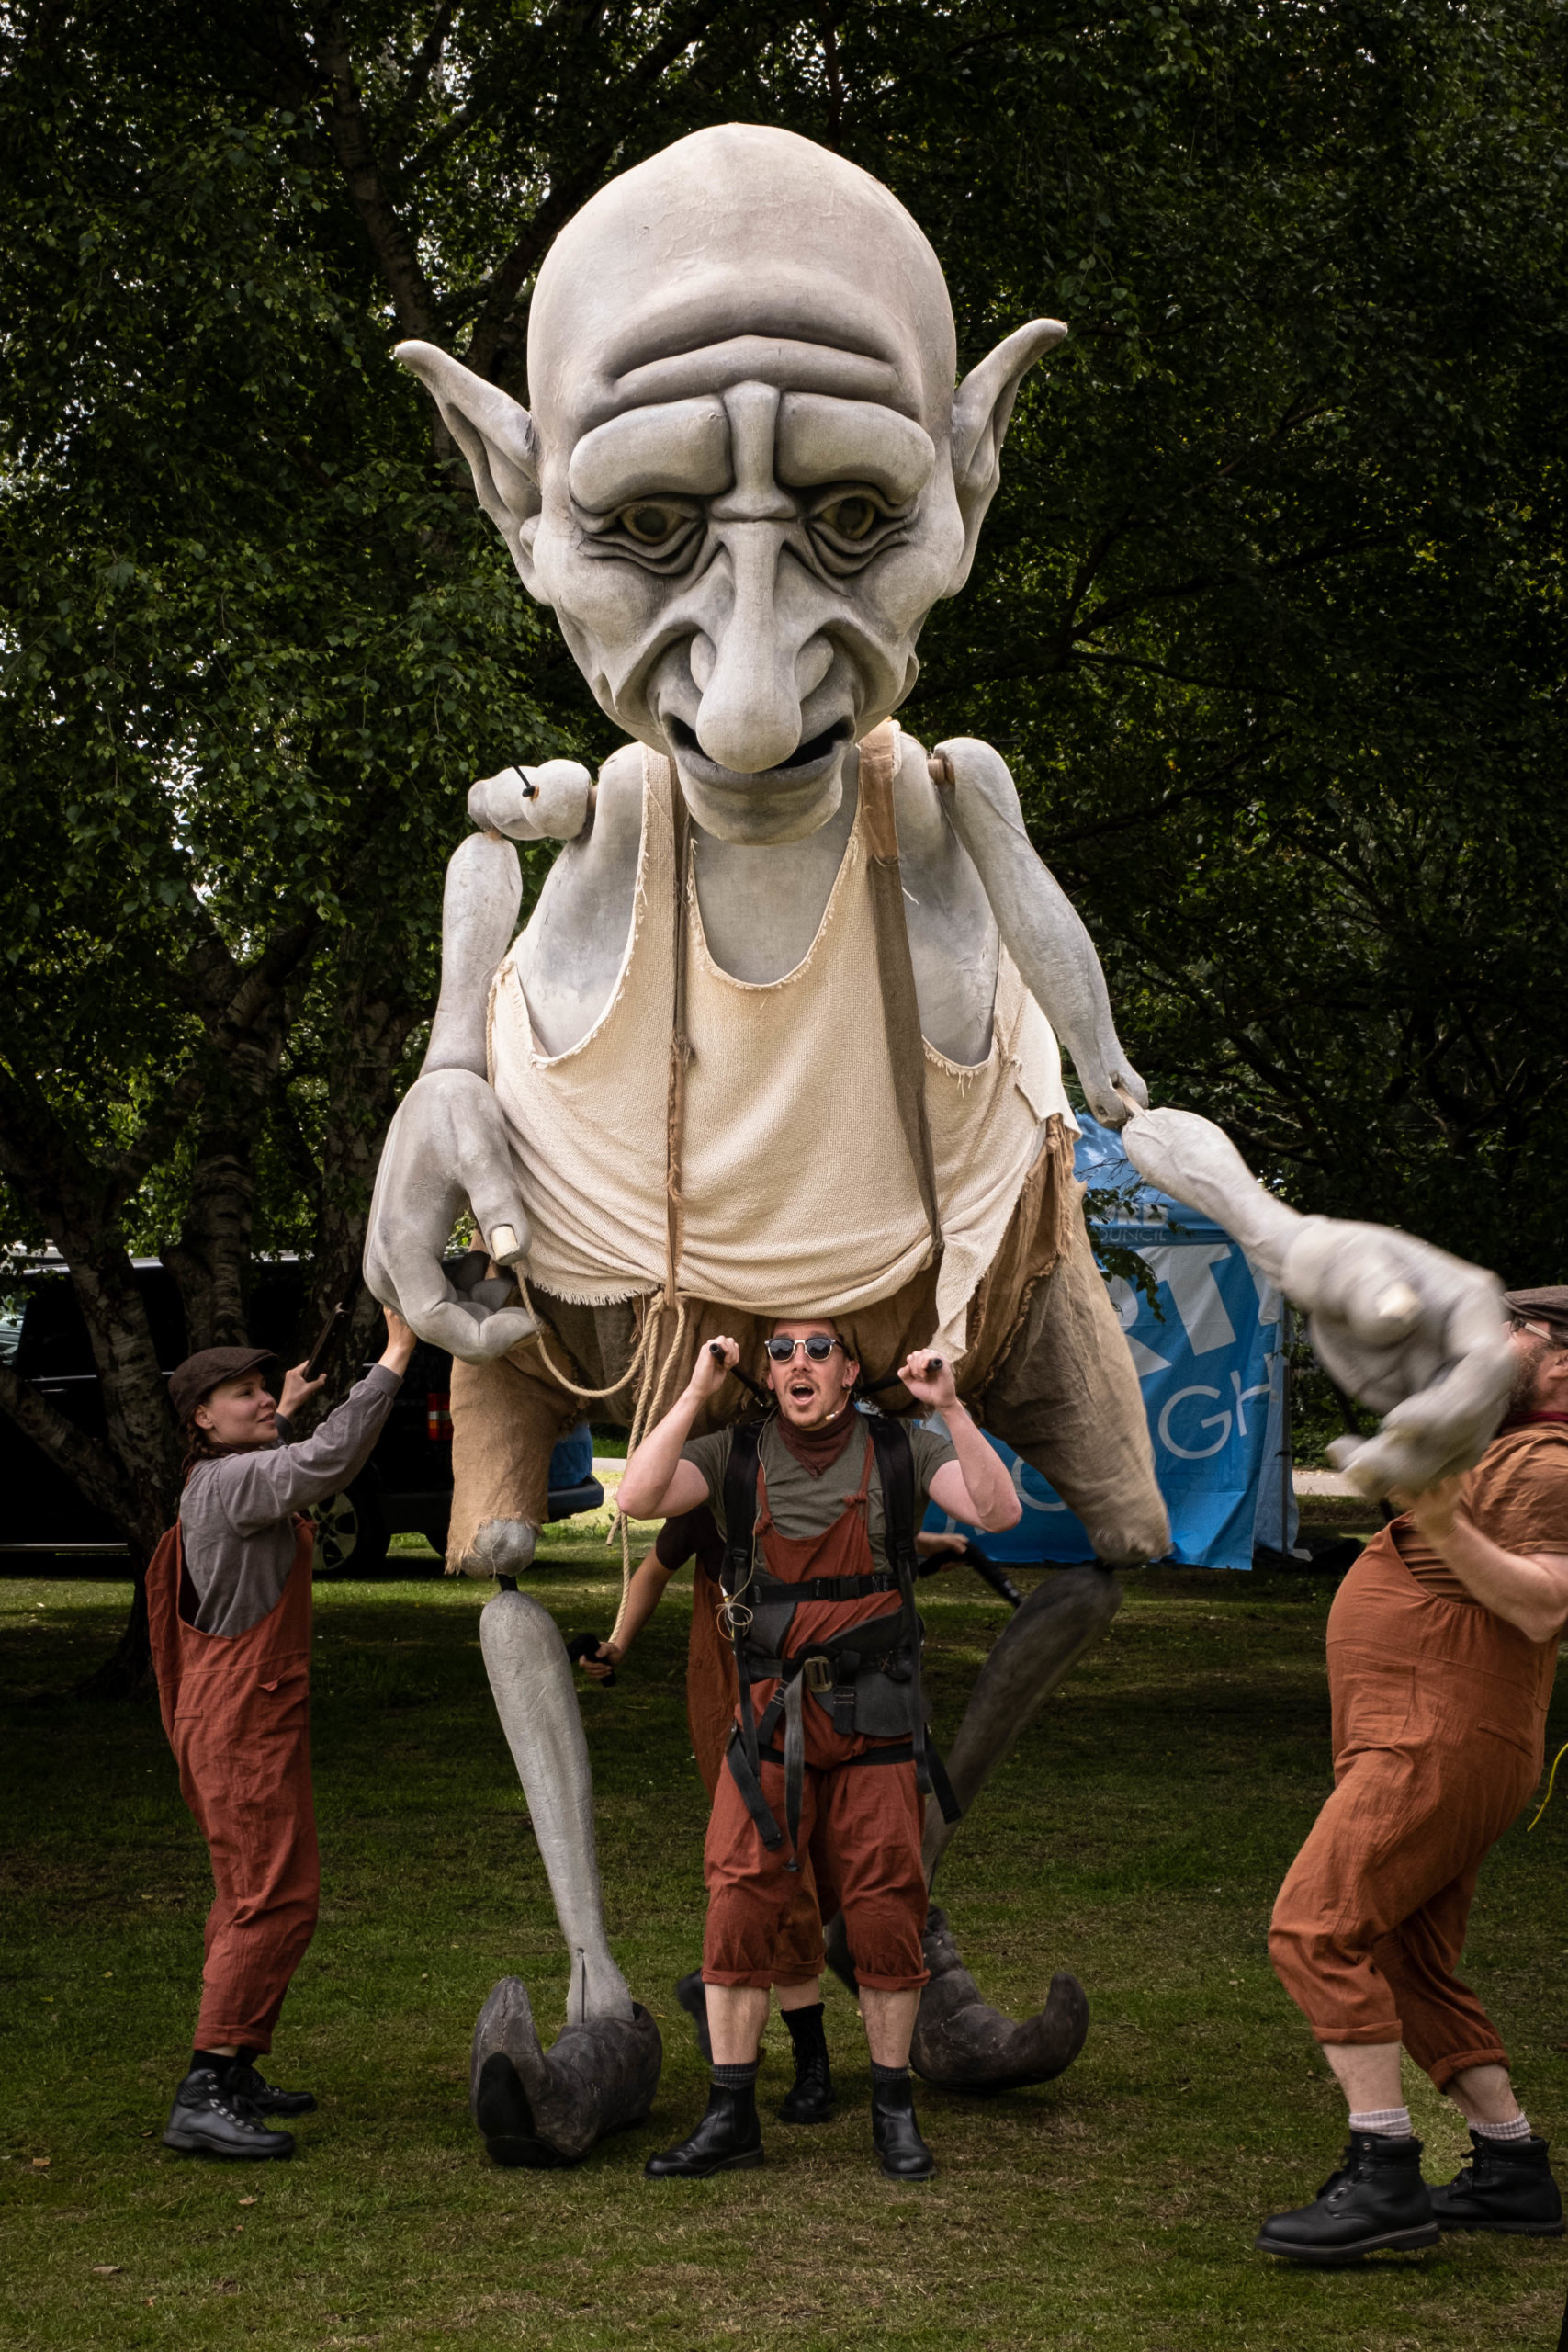 Extra large puppet with three people underneath moving it